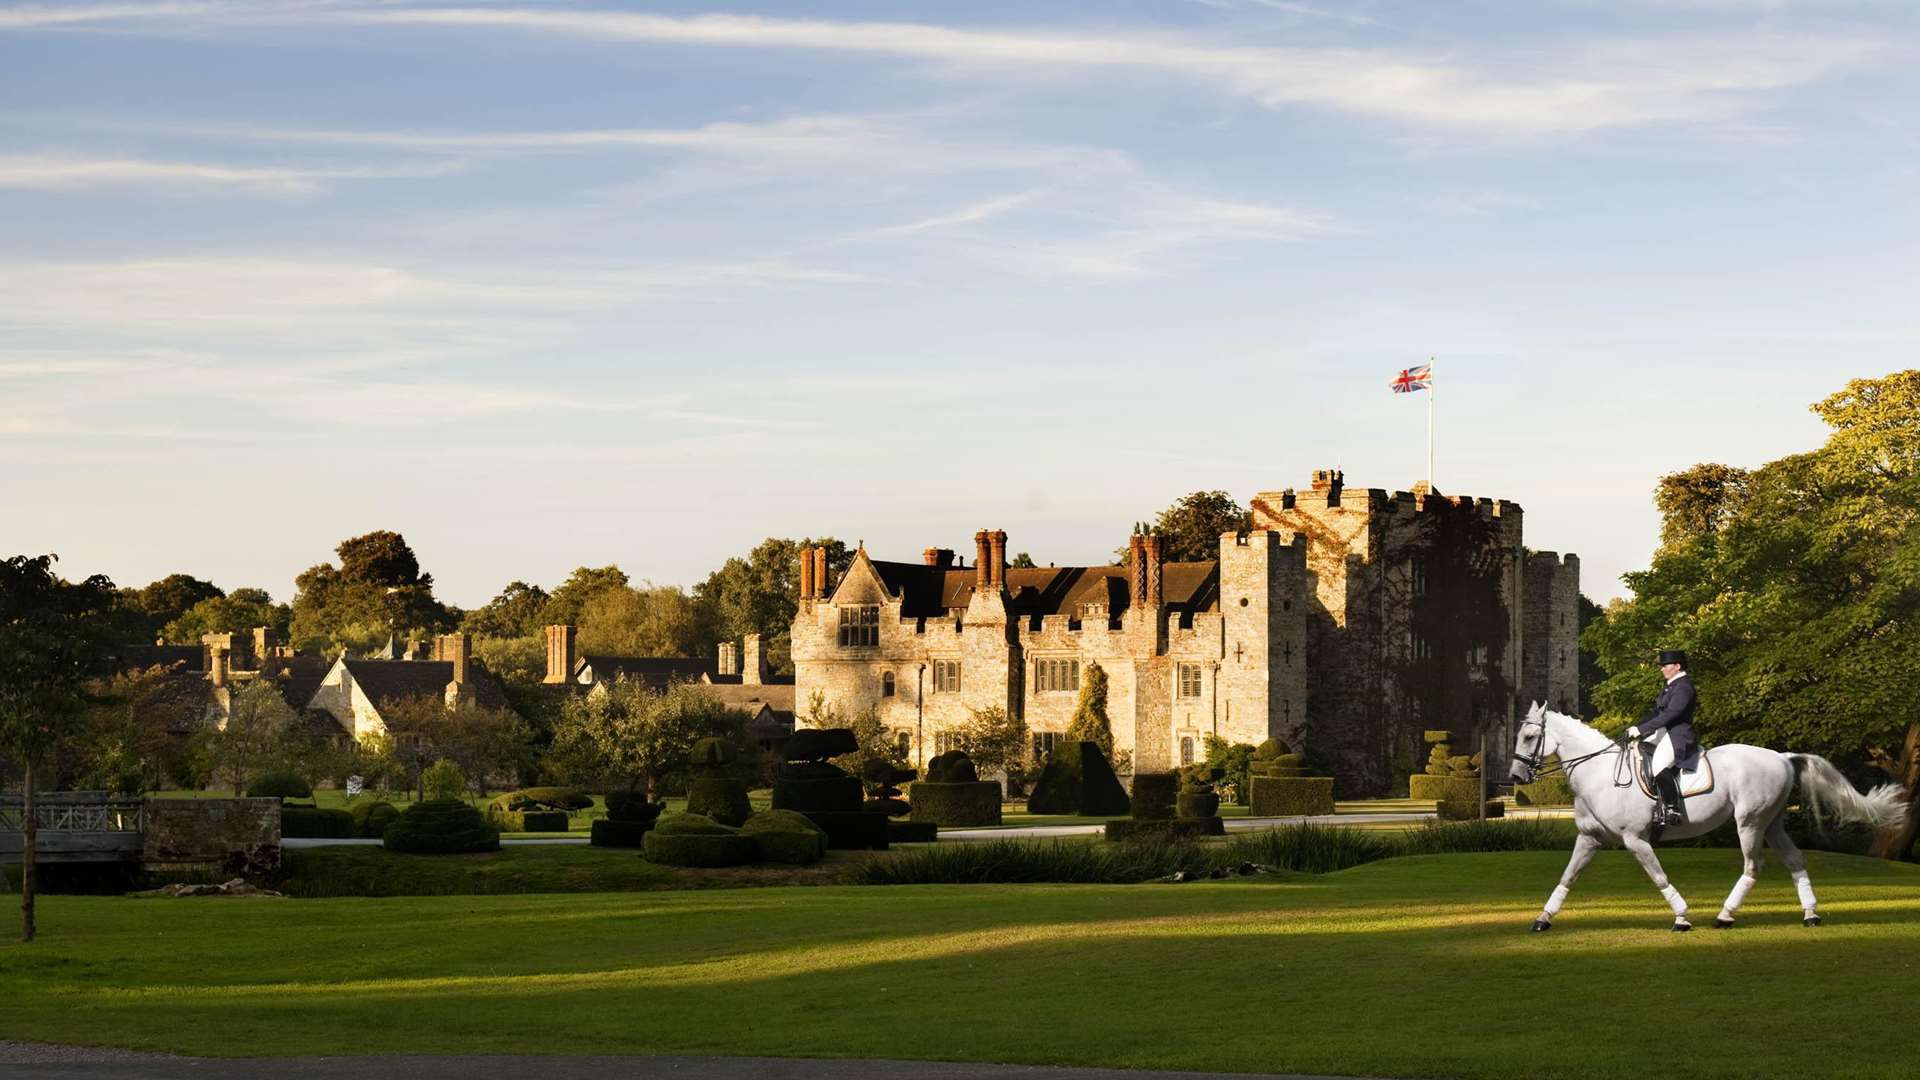 Hever Castle has been awarded a certificate of excellence by TripAdvisor